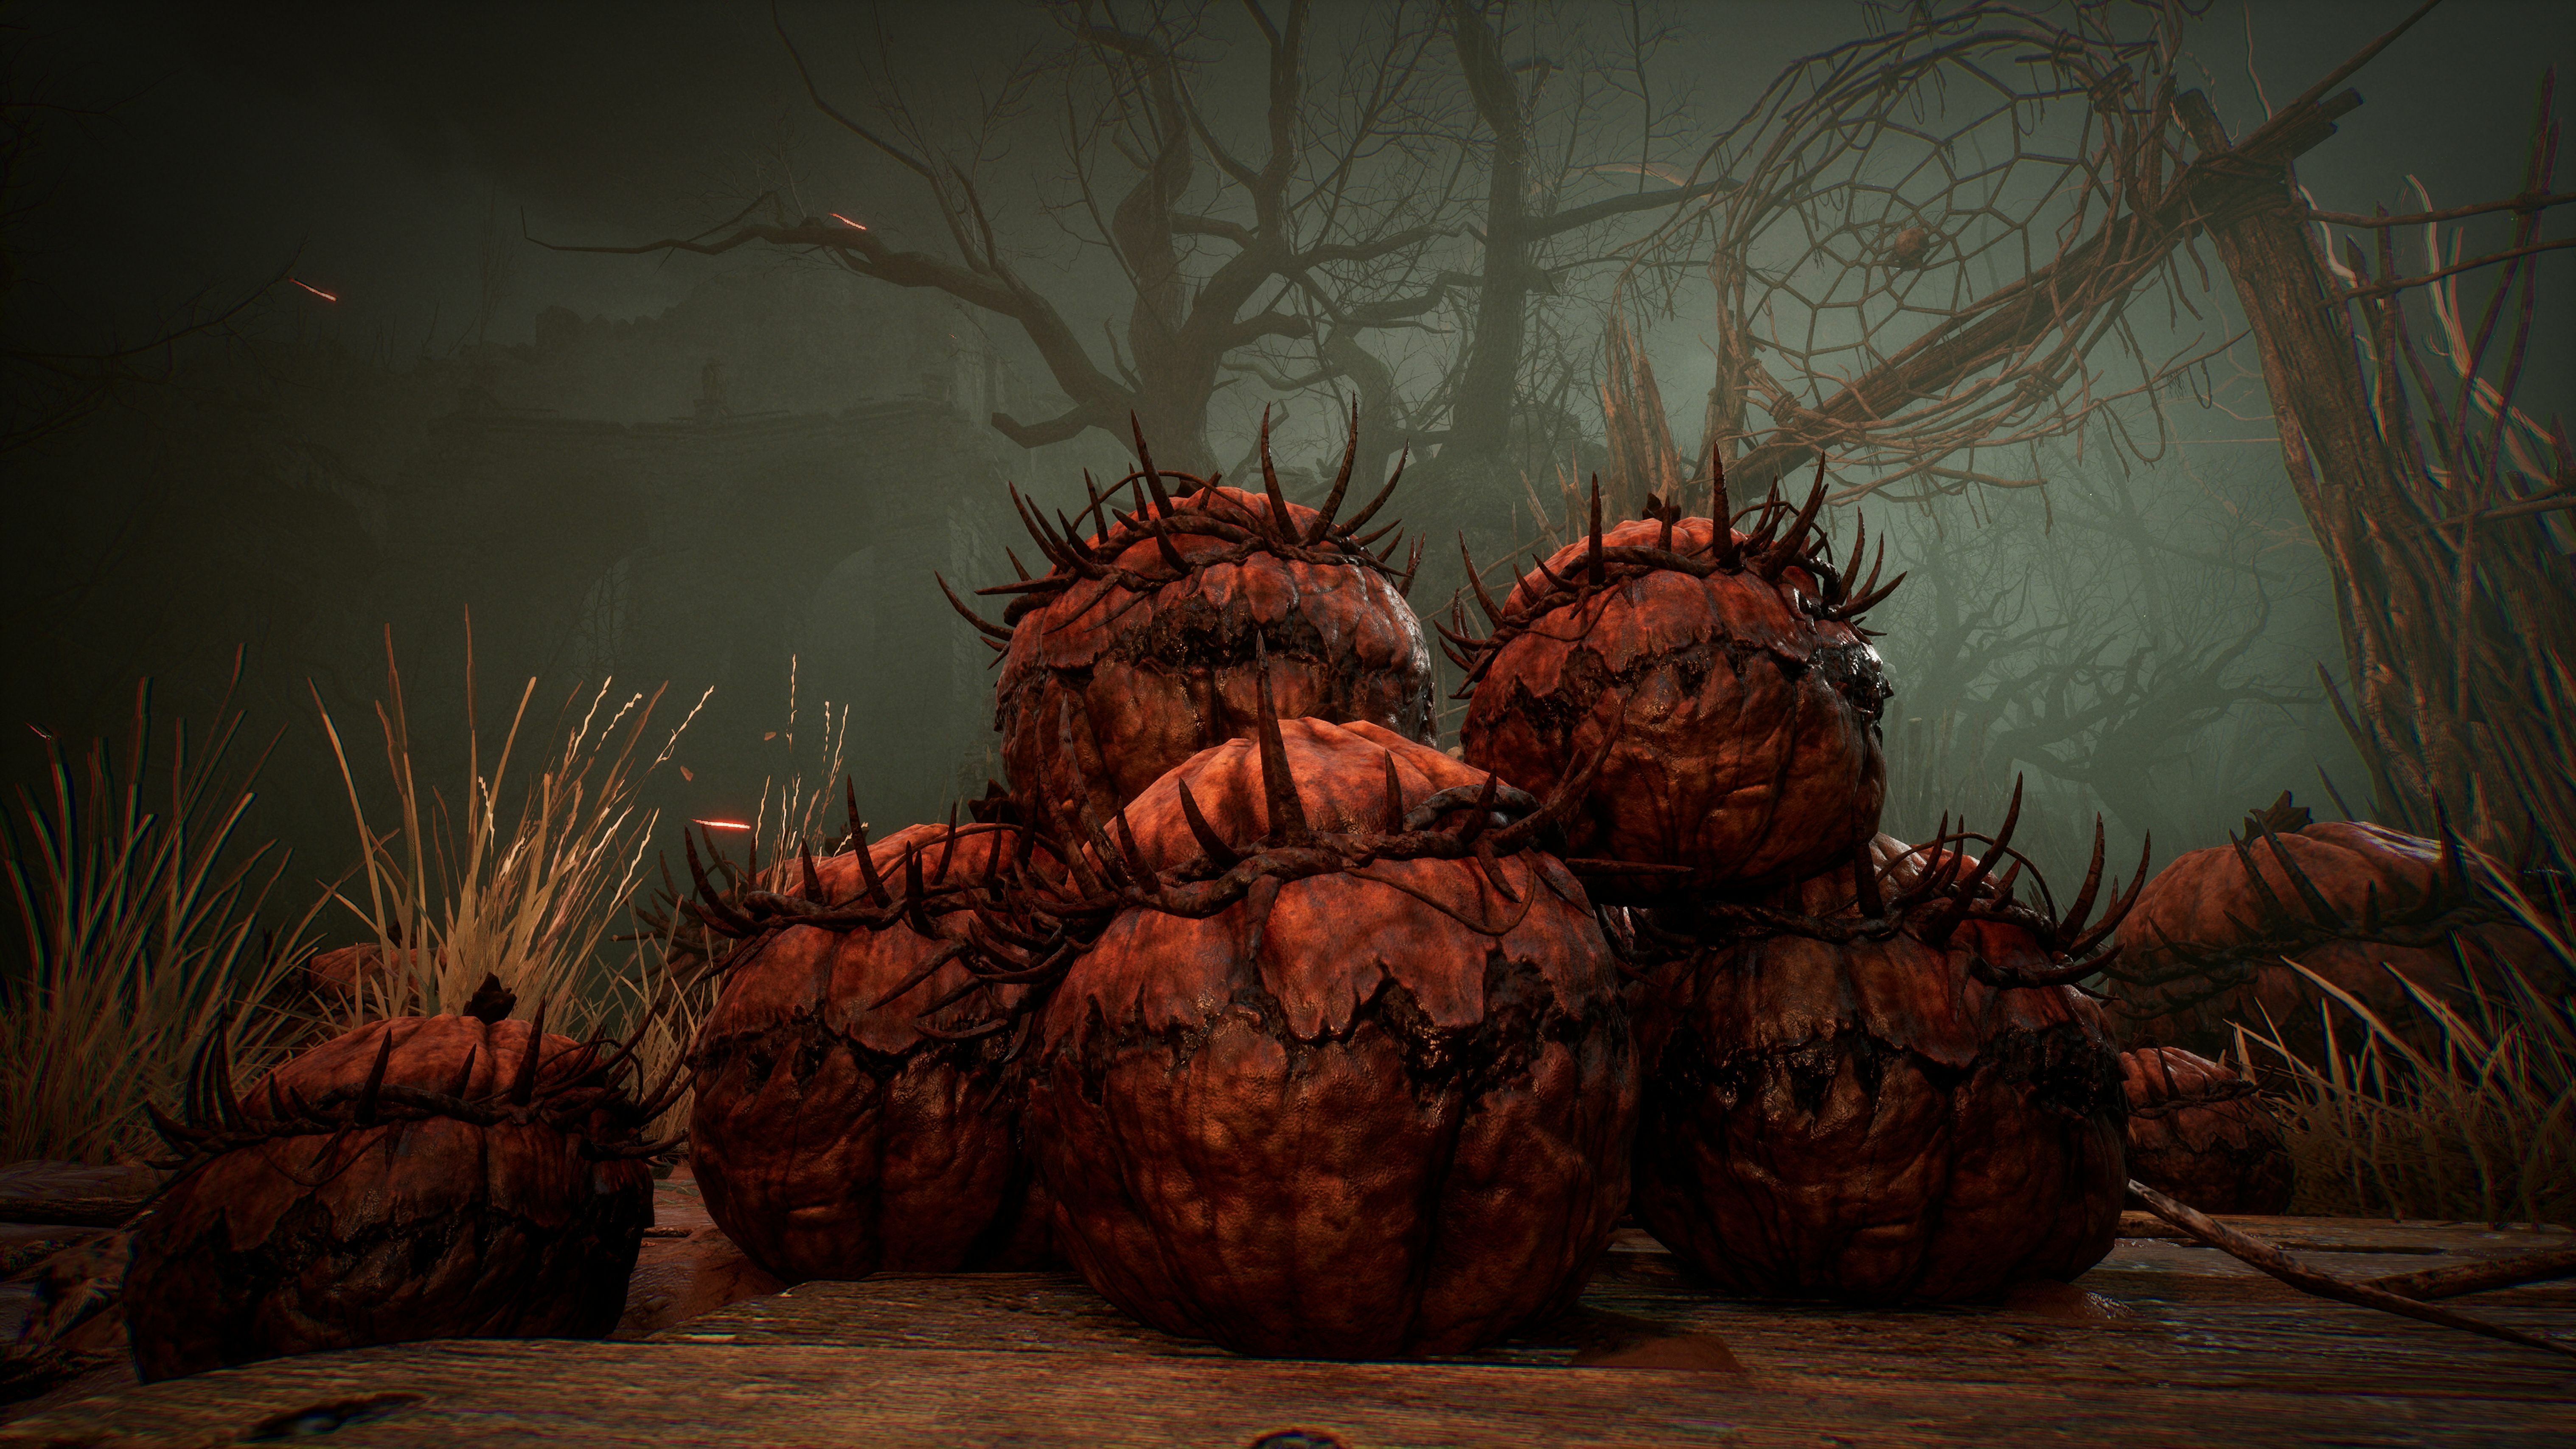 Visit the Lords of the Fallen Pumpkin Patch today with the